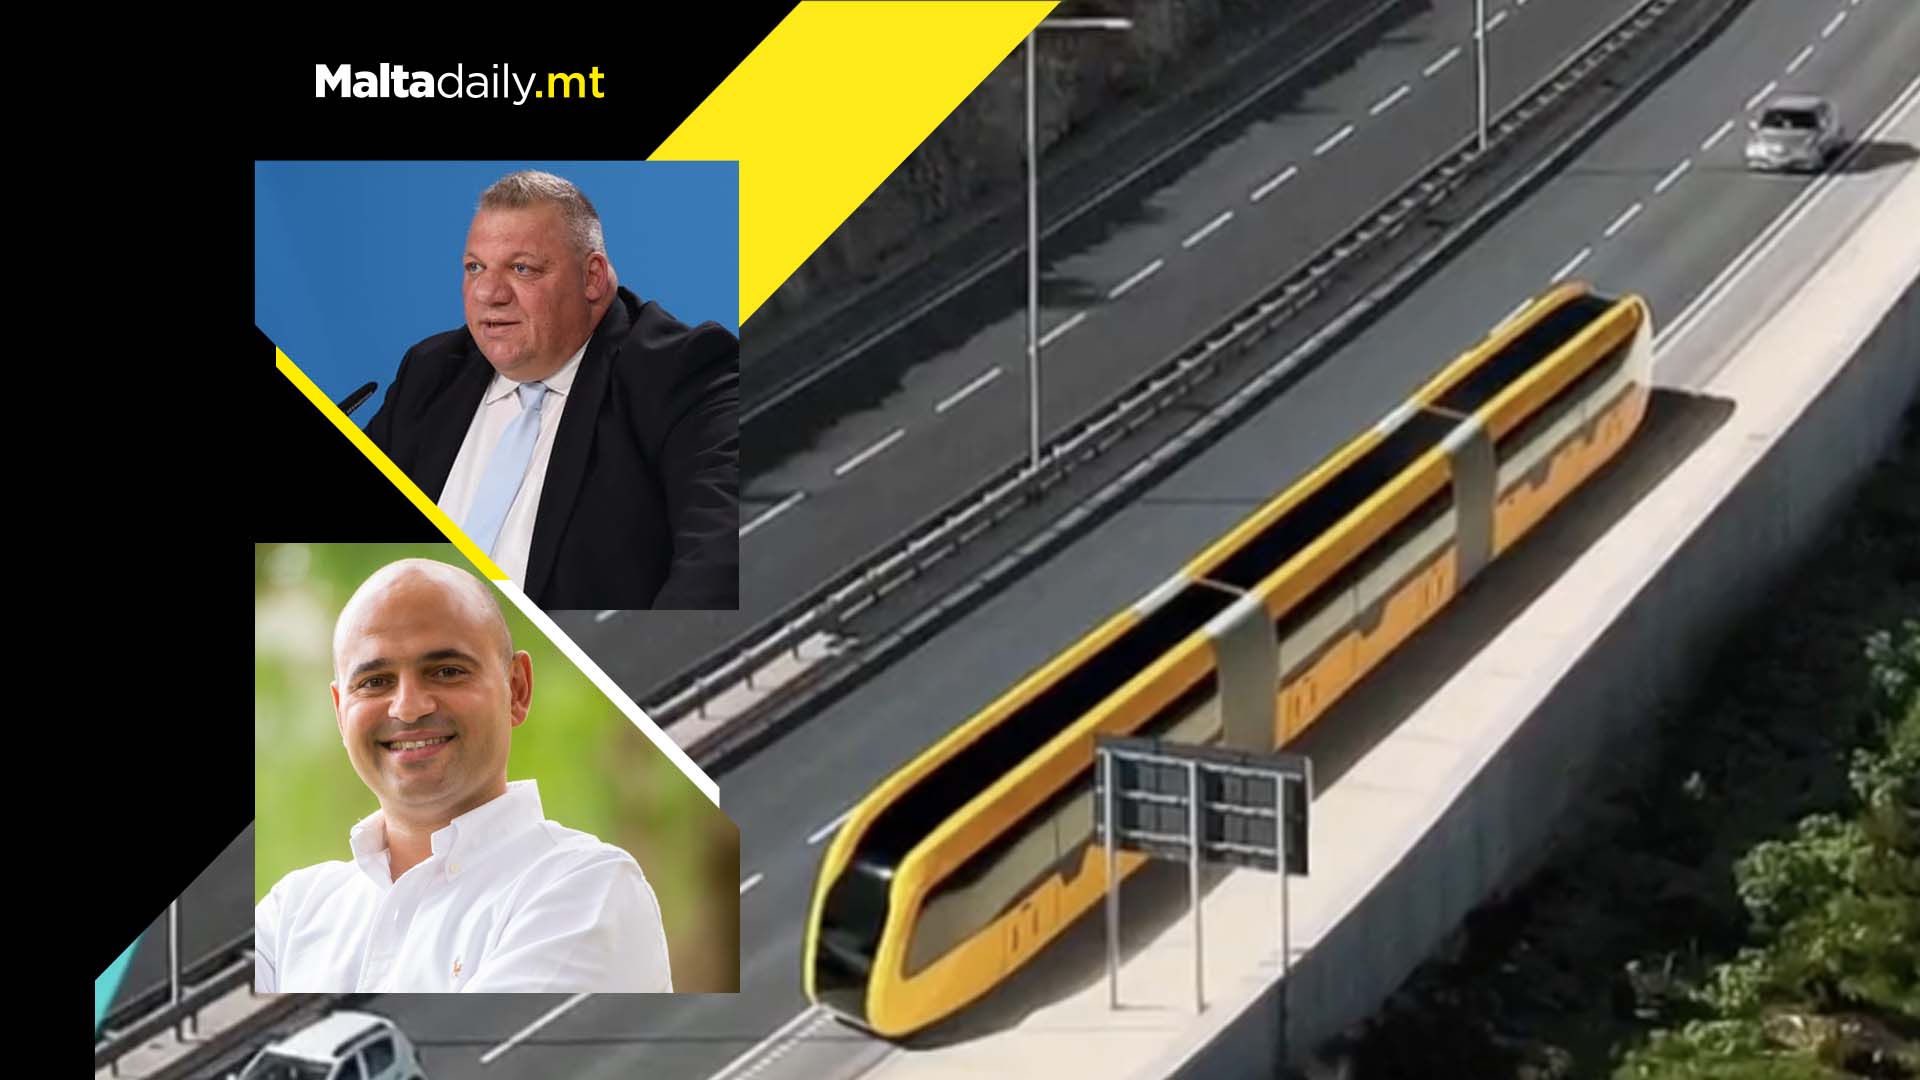 Contradicting claims by two PN candidates about trackless tram car lanes